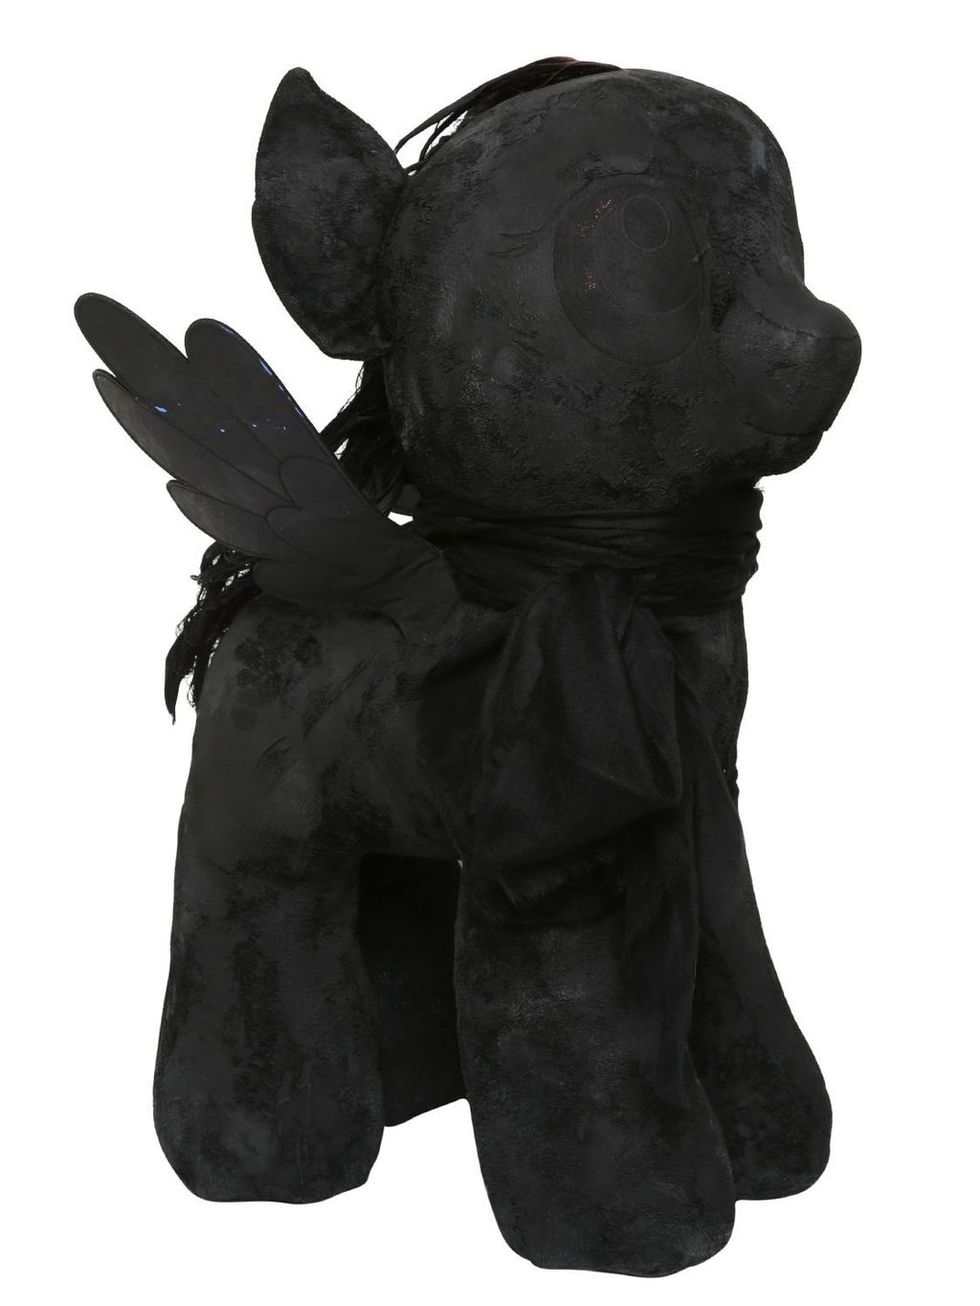 Toy, Costume accessory, Black, Figurine, Fictional character, Animation, Wing, Stuffed toy, 